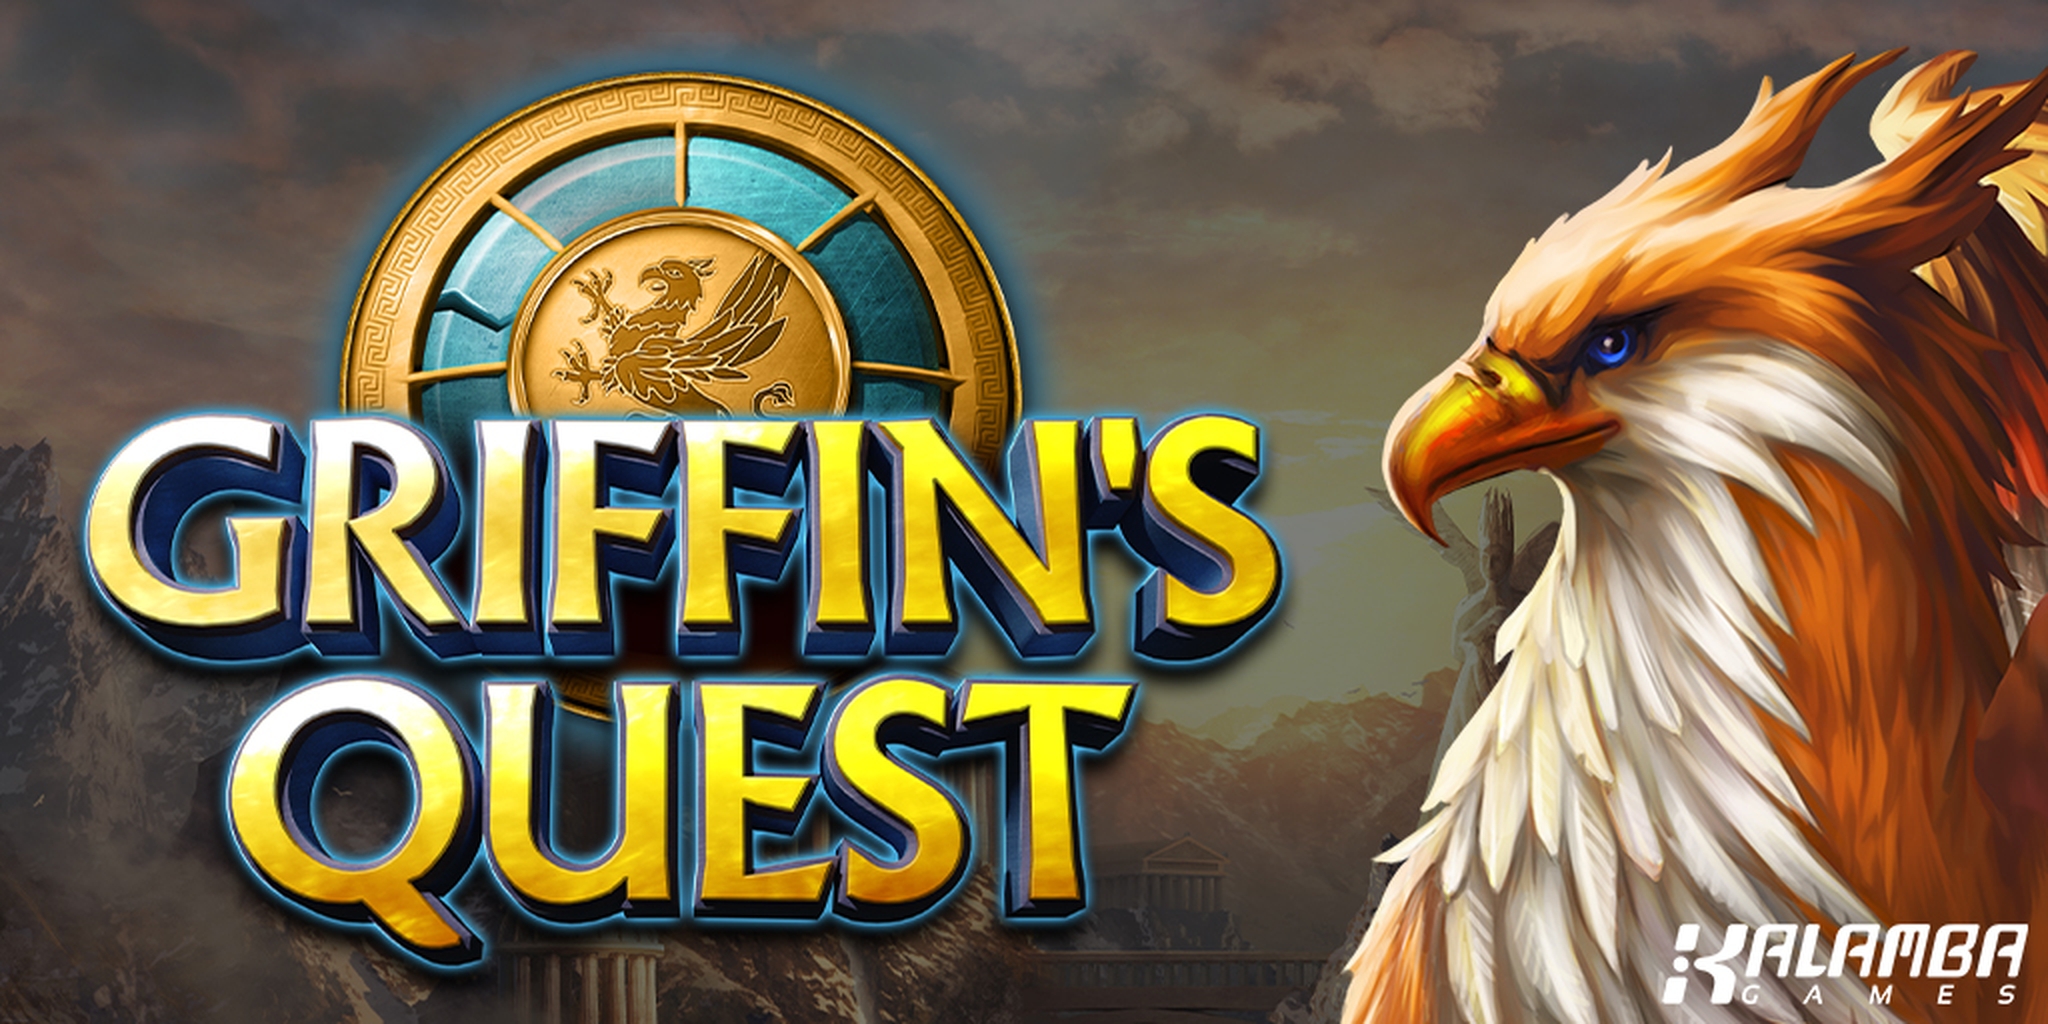 The Griffins Quest Online Slot Demo Game by Kalamba Games